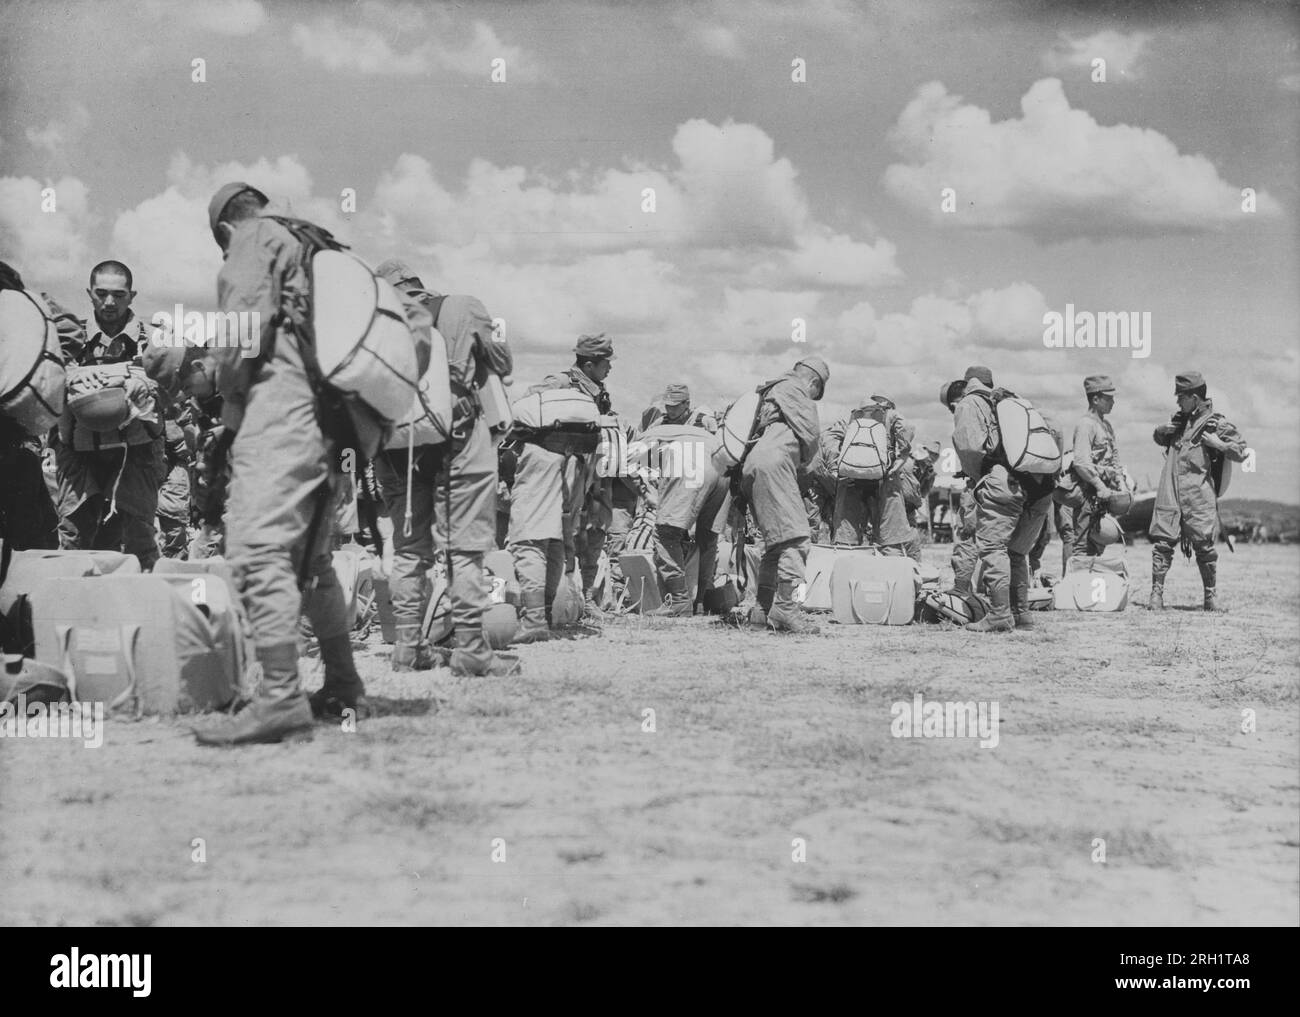 Battle of Palembang, February 13-15 1942. Airborne troops of the Imperial Japanese Army’s ‘Teishin Shudan’ (Raiding Group) suit up into their jump smocks and secure their parachute gear in preparation for their raid on Palembang, February 14 1942. Stock Photo